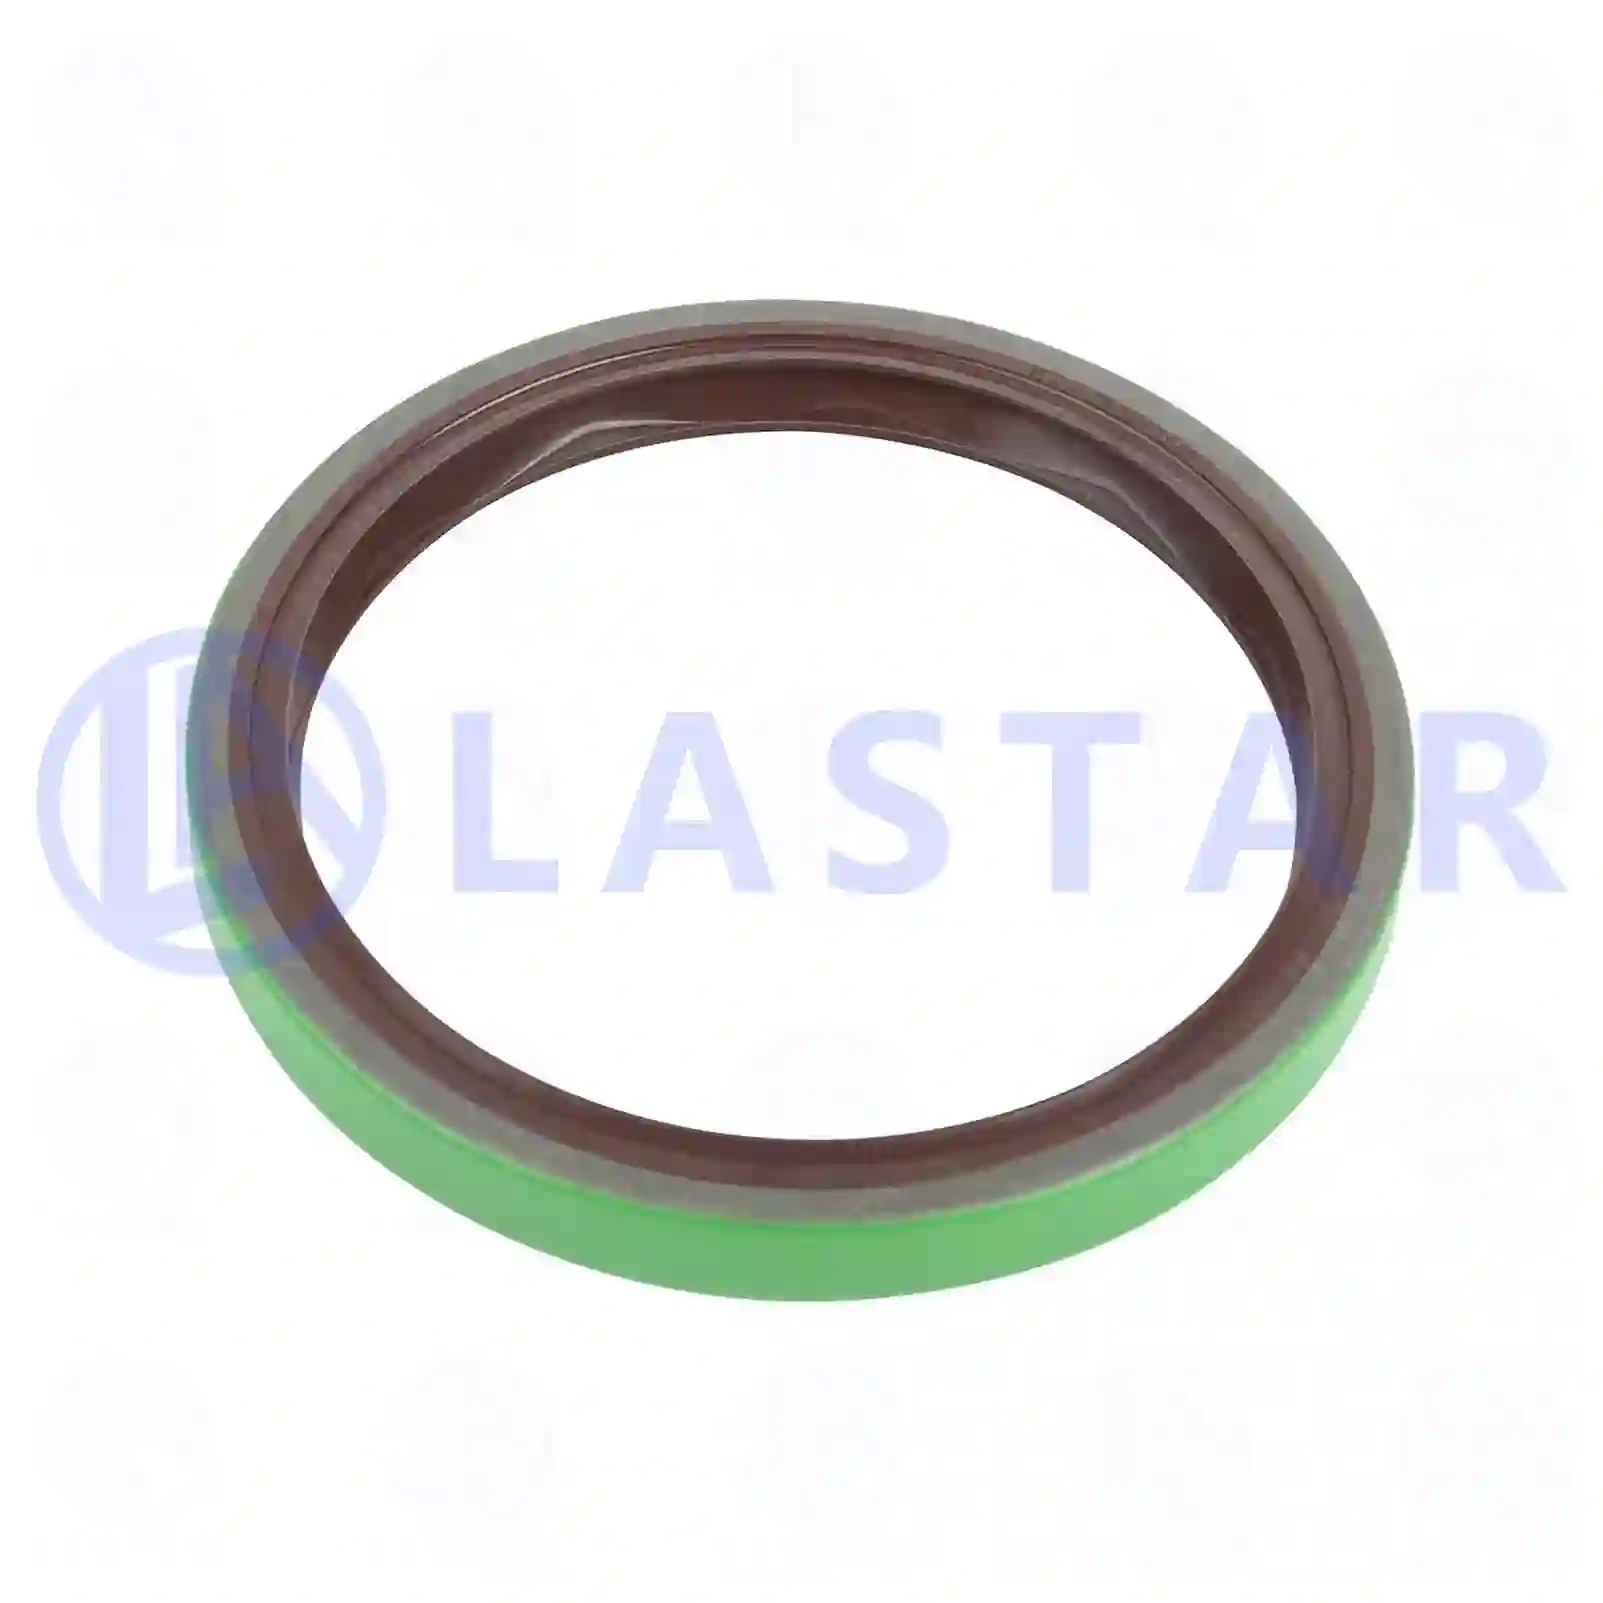 Oil seal, 77732013, 0696084, 696084, 00583993, 01905085, 07980661, 09930128, 1905085, 42490447, 42490441, 42535096, 583993, 7980661, 93193398, 9930128, 81965020451, 5000814109, 5001831130, 7701015247 ||  77732013 Lastar Spare Part | Truck Spare Parts, Auotomotive Spare Parts Oil seal, 77732013, 0696084, 696084, 00583993, 01905085, 07980661, 09930128, 1905085, 42490447, 42490441, 42535096, 583993, 7980661, 93193398, 9930128, 81965020451, 5000814109, 5001831130, 7701015247 ||  77732013 Lastar Spare Part | Truck Spare Parts, Auotomotive Spare Parts